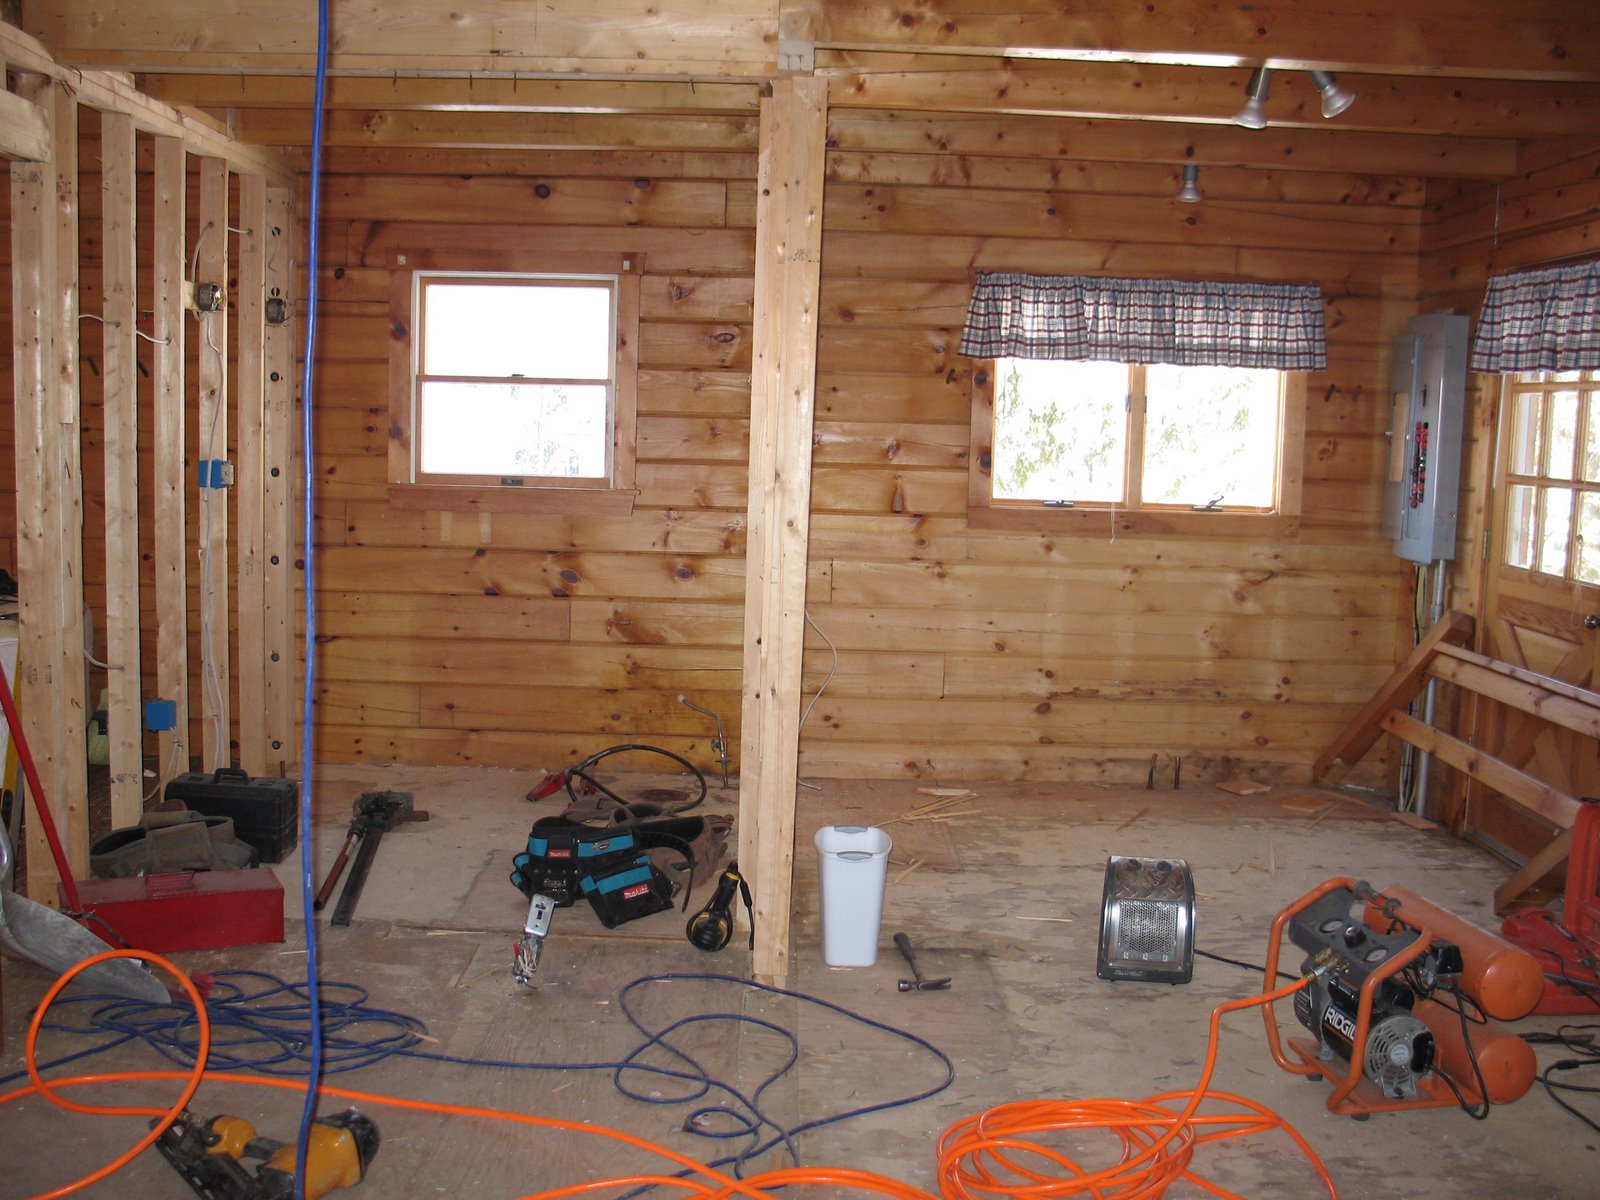 [Camp+bathroom+kitchen+BEFORE+pictures.JPG]